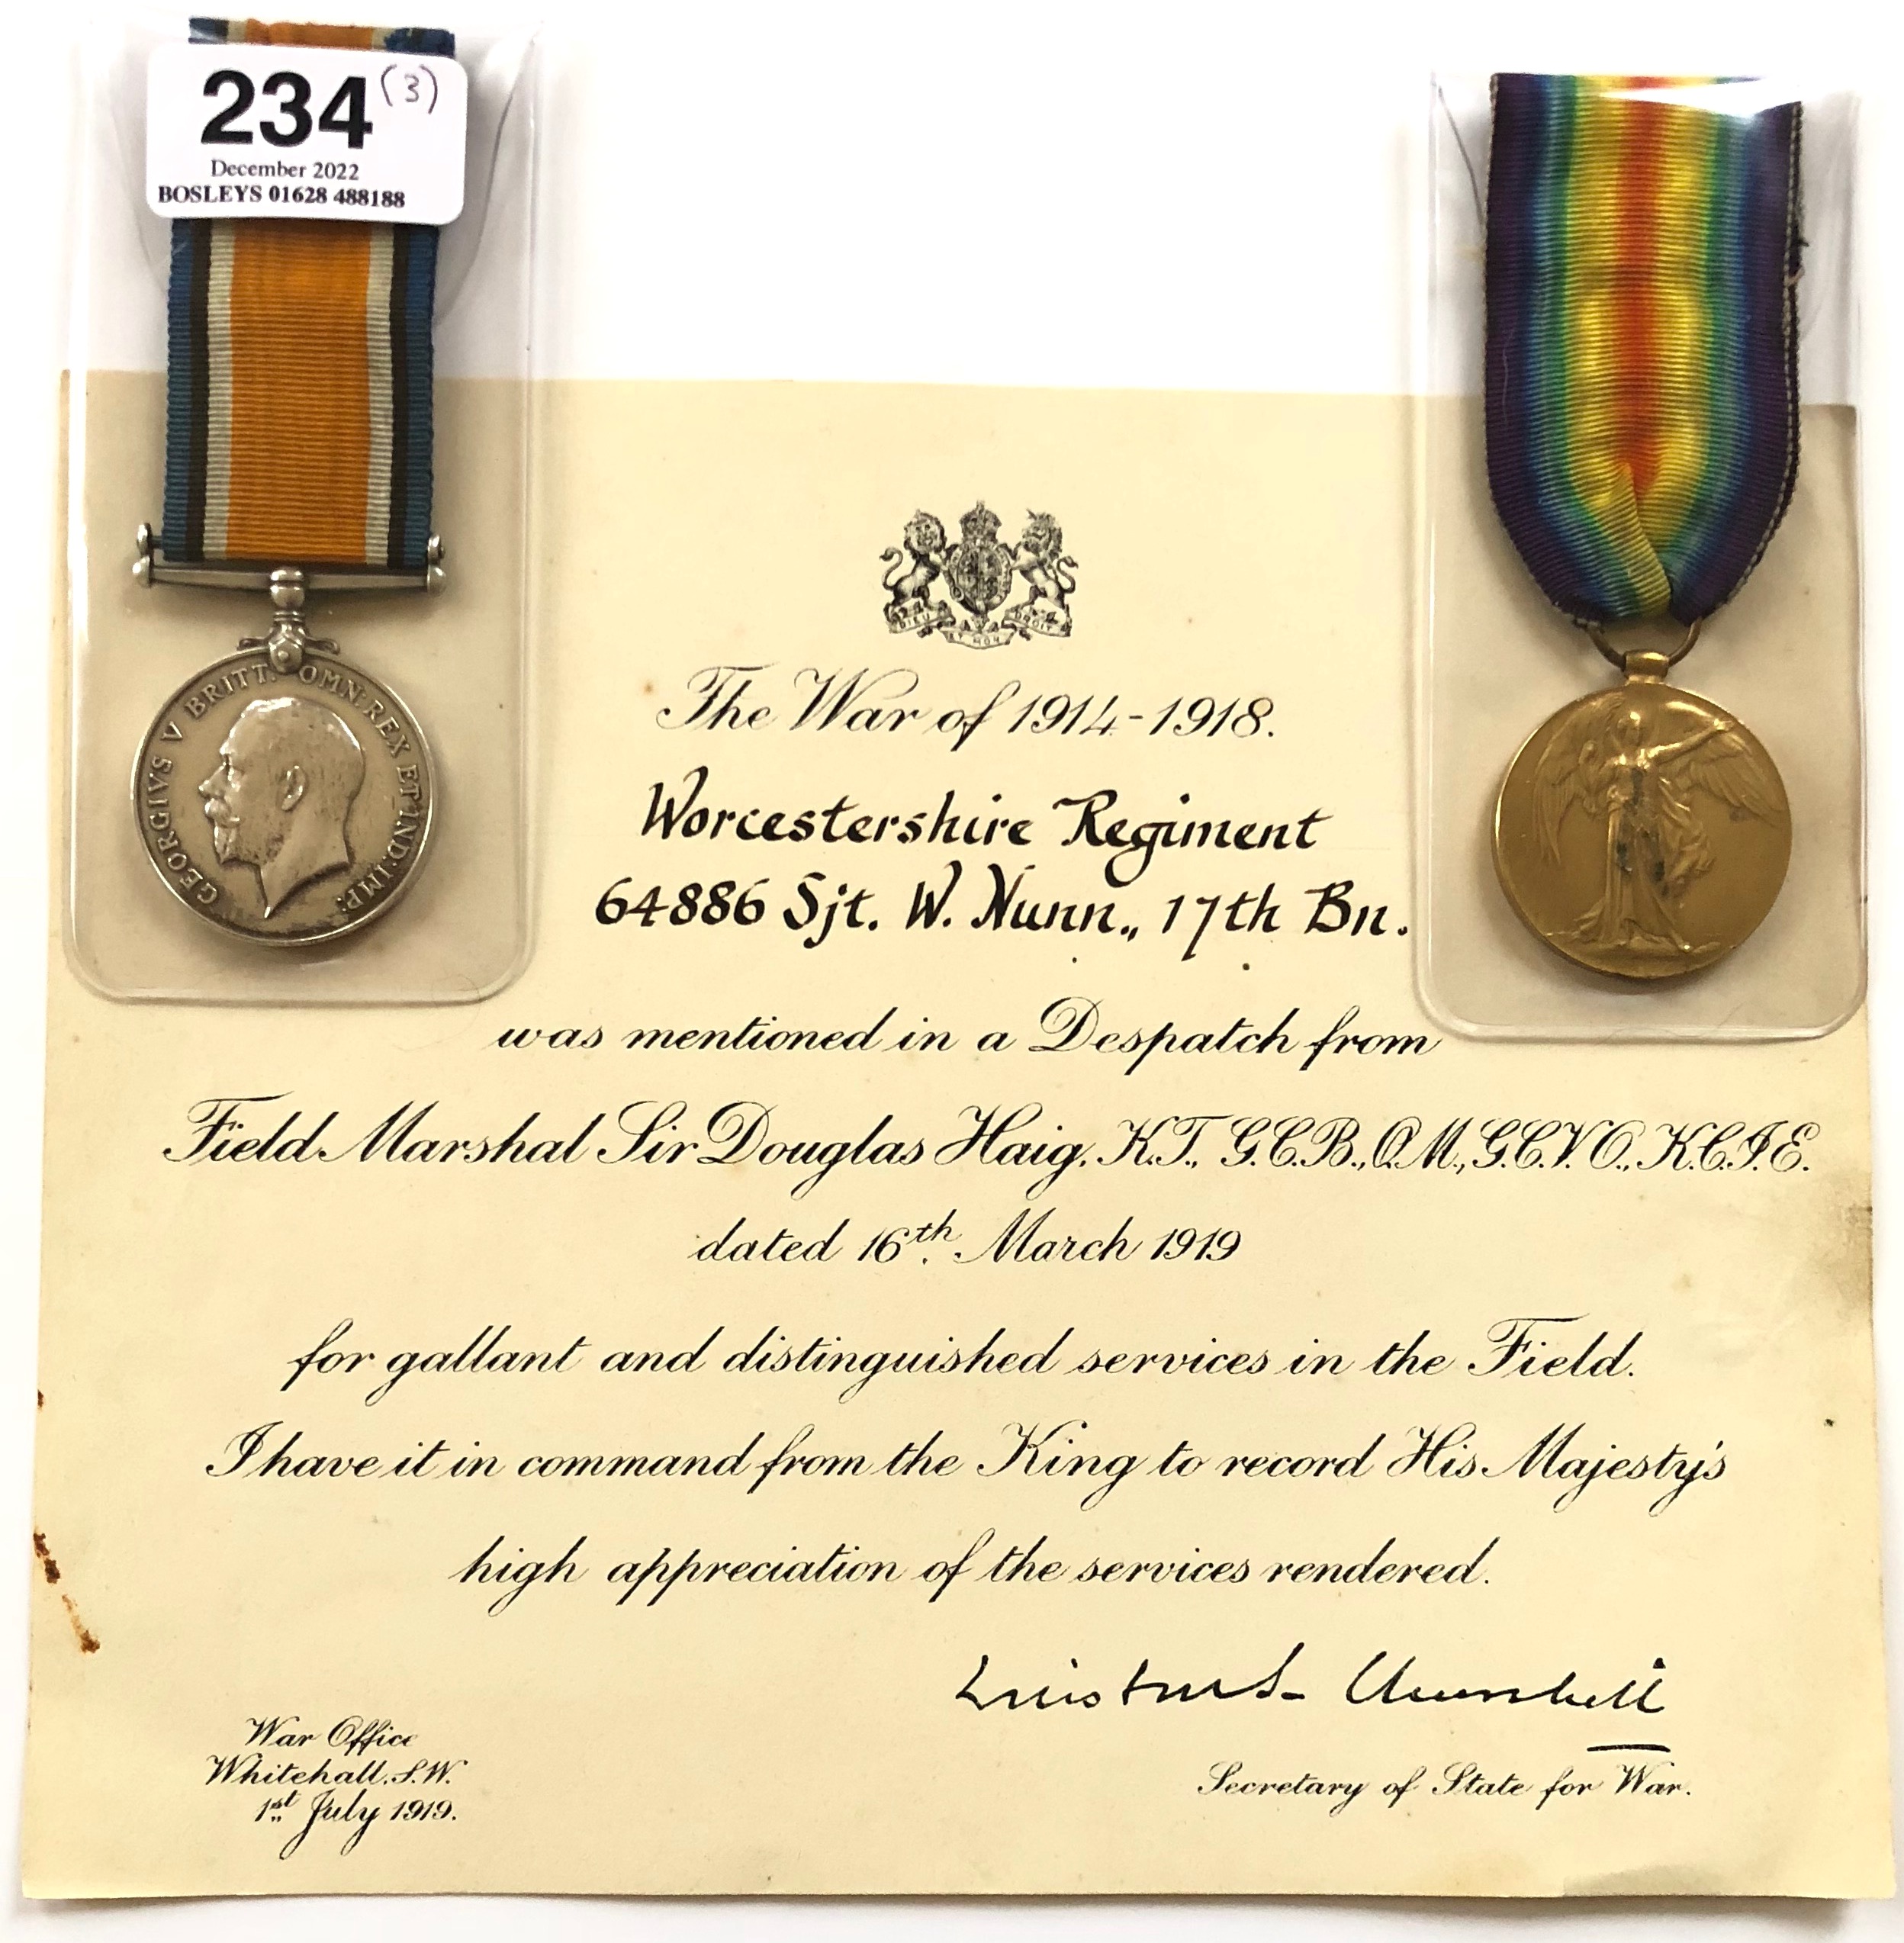 WW1 West Yorkshire / Worcestershire Regiment MID Medals and Certificate. Awarded to Sergeant William